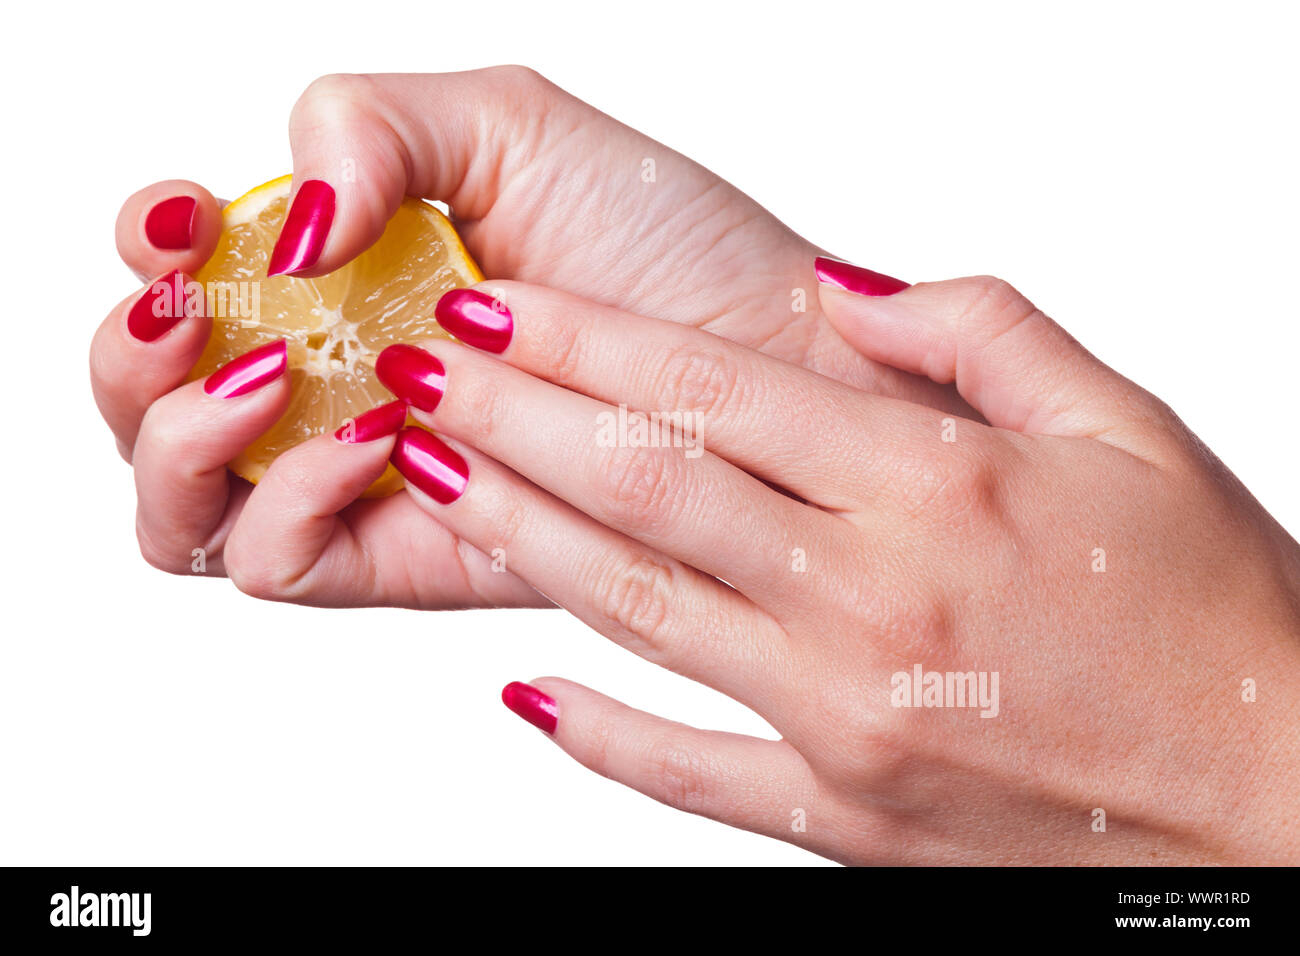 Hand with manicured nails squeeze lemon on white Stock Photo